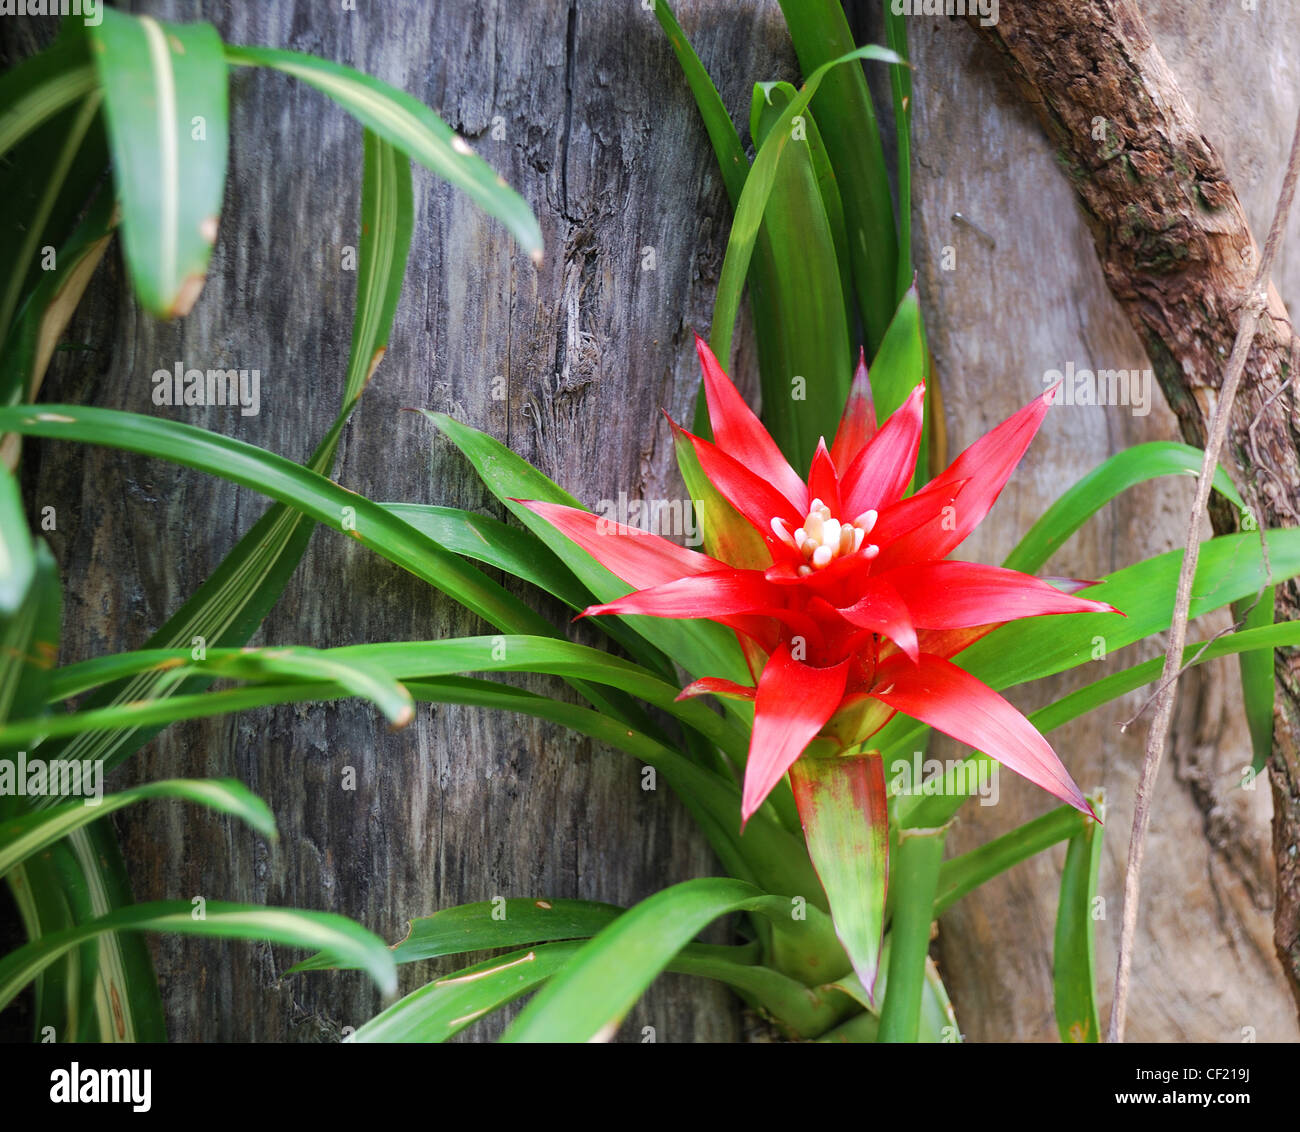 Large red flower of green plant against old tree trunk. Stock Photo